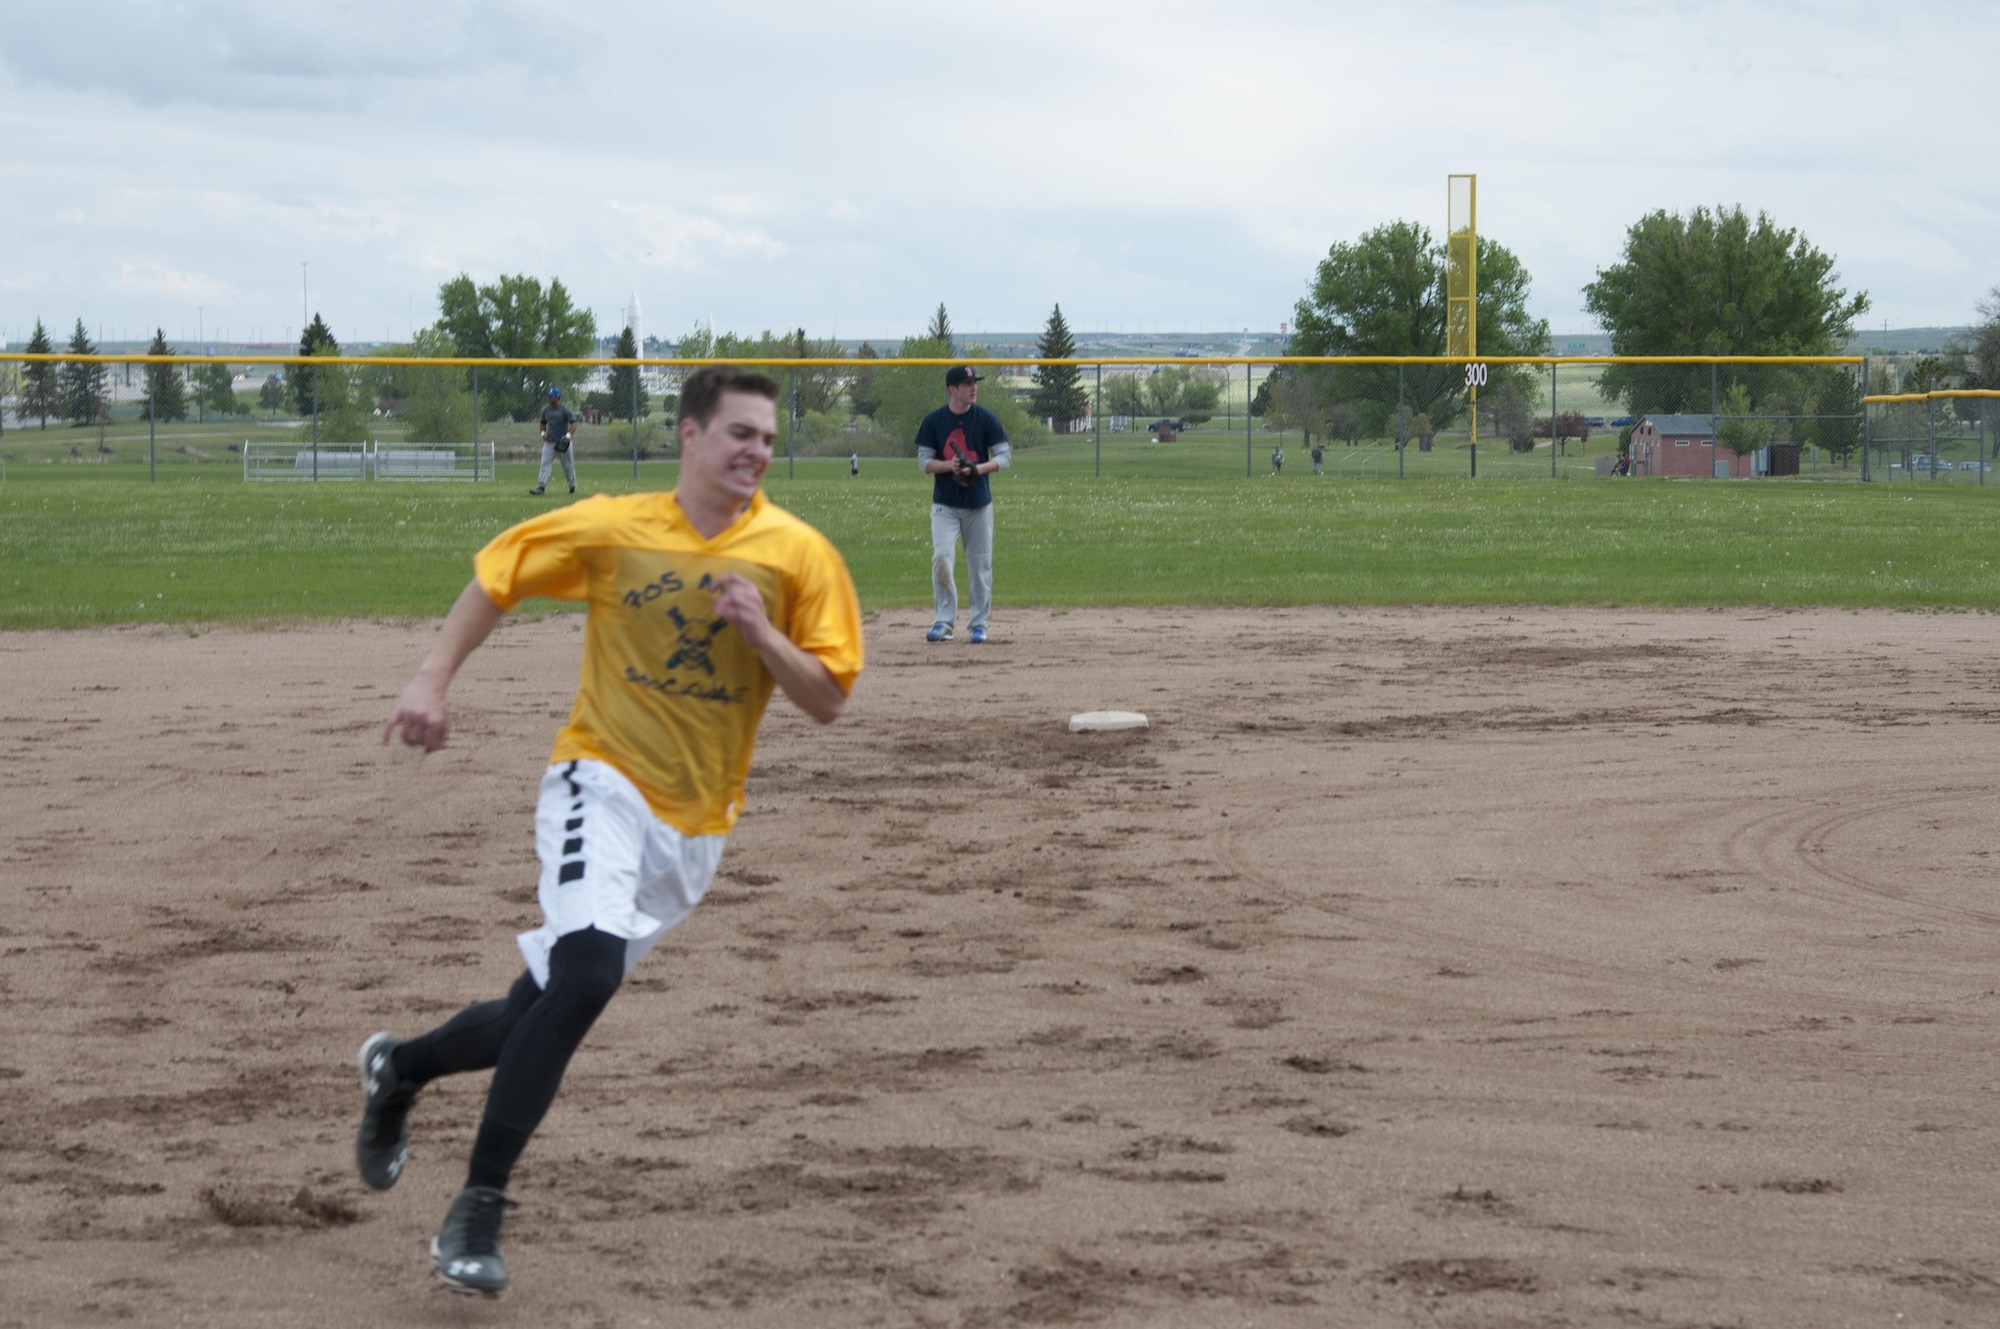 Cameron Perkins, 90th Munitions Squadron intramural softball team player, rounds third on his way to the home plate May 31, 2016, on one of the F.E. Warren Air Force Base, Wyo., ball fields. Perkins made one of the 21 runs of the game for his team, clinching victory against the 790th Missile Security Forces Squadron's 9 points in the game. (U.S. Air Force photo by Senior Airman Jason Wiese)